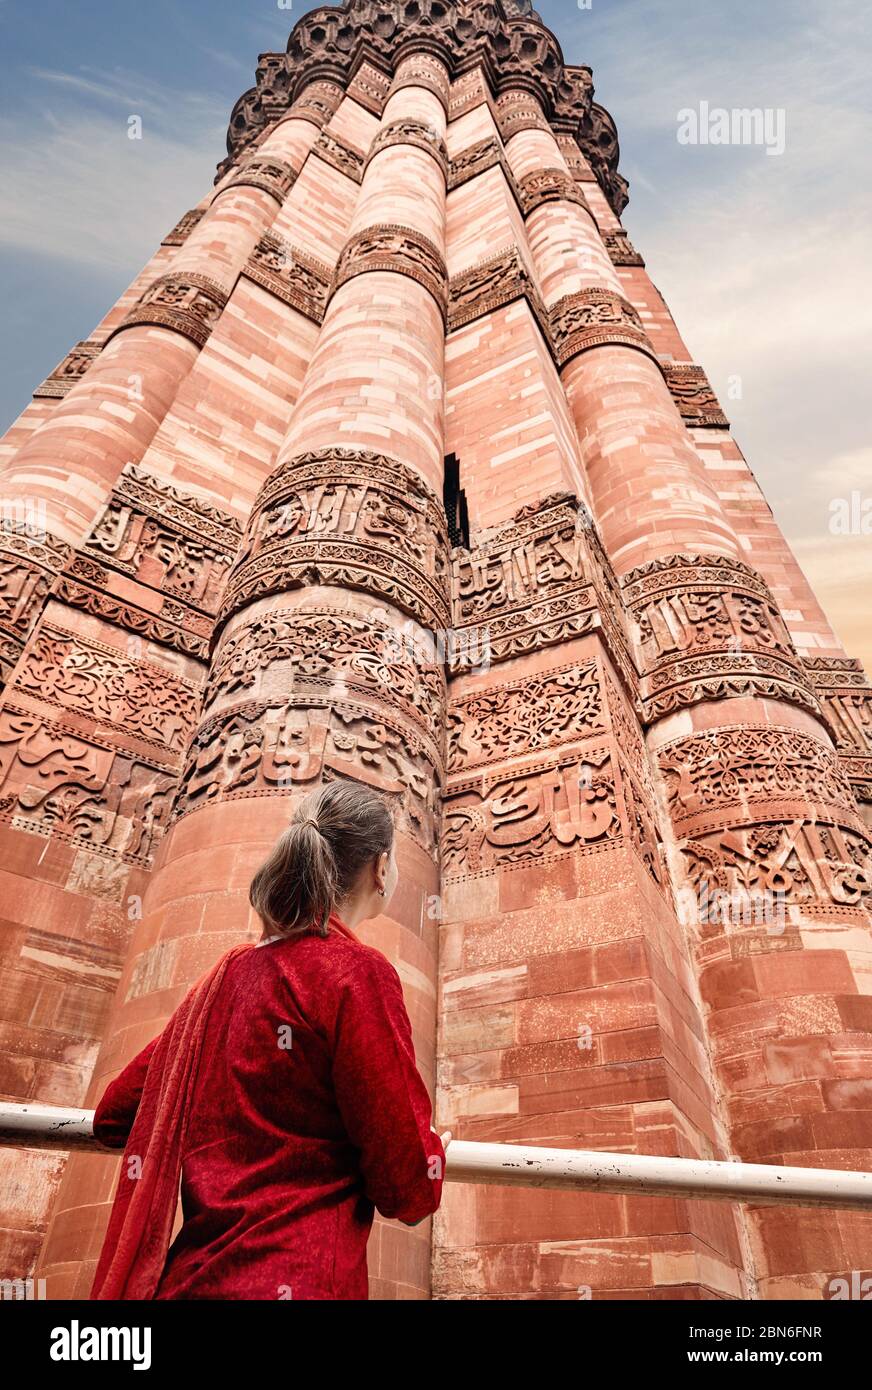 Woman in red costume is looking at Qutub Minar tower in Delhi, India Stock Photo